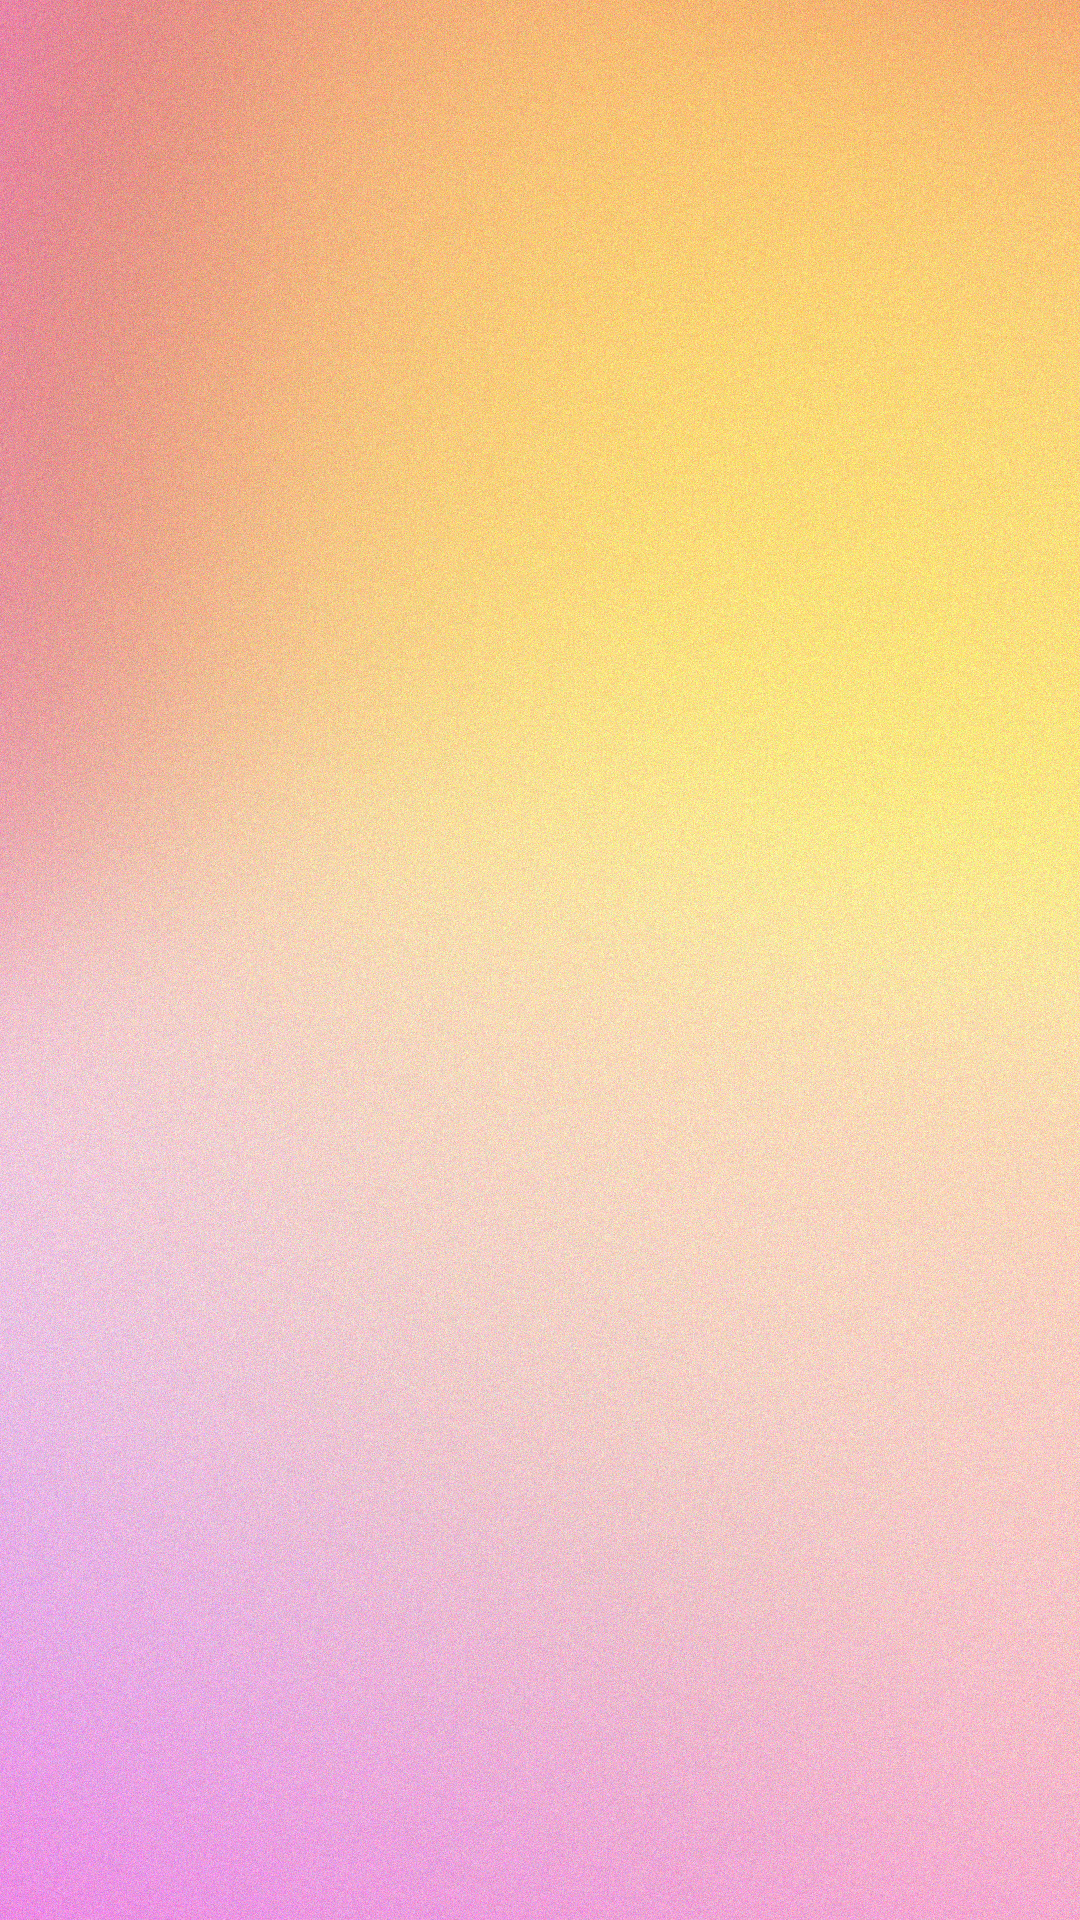 Smooth Gradient Background for Instagram Story